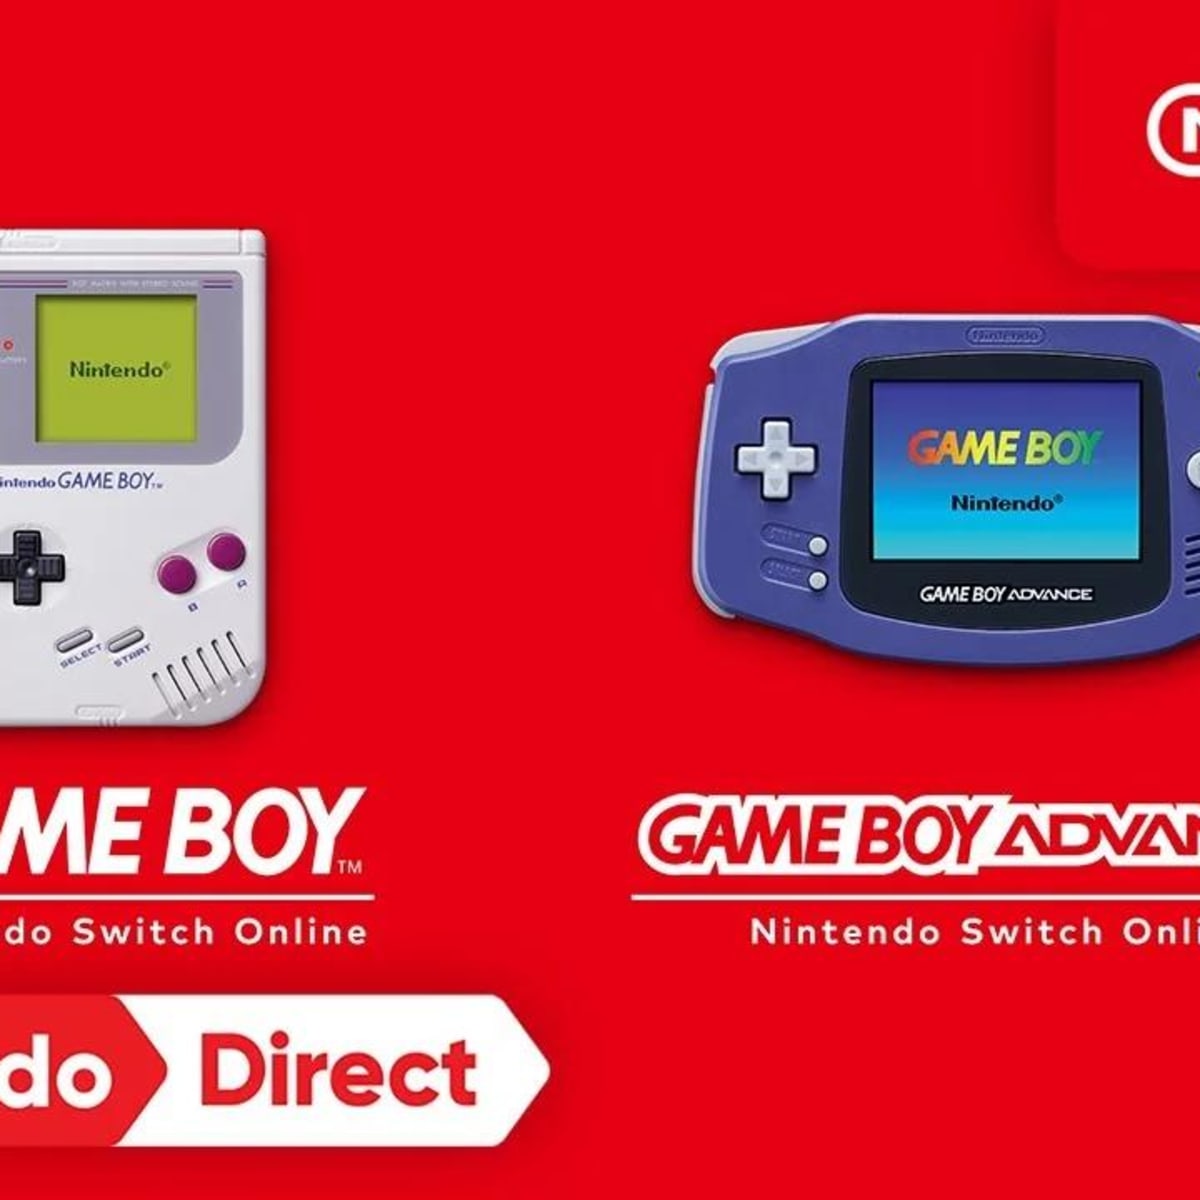 Game Boy, Color & Advance Games Coming To The Nintendo Switch